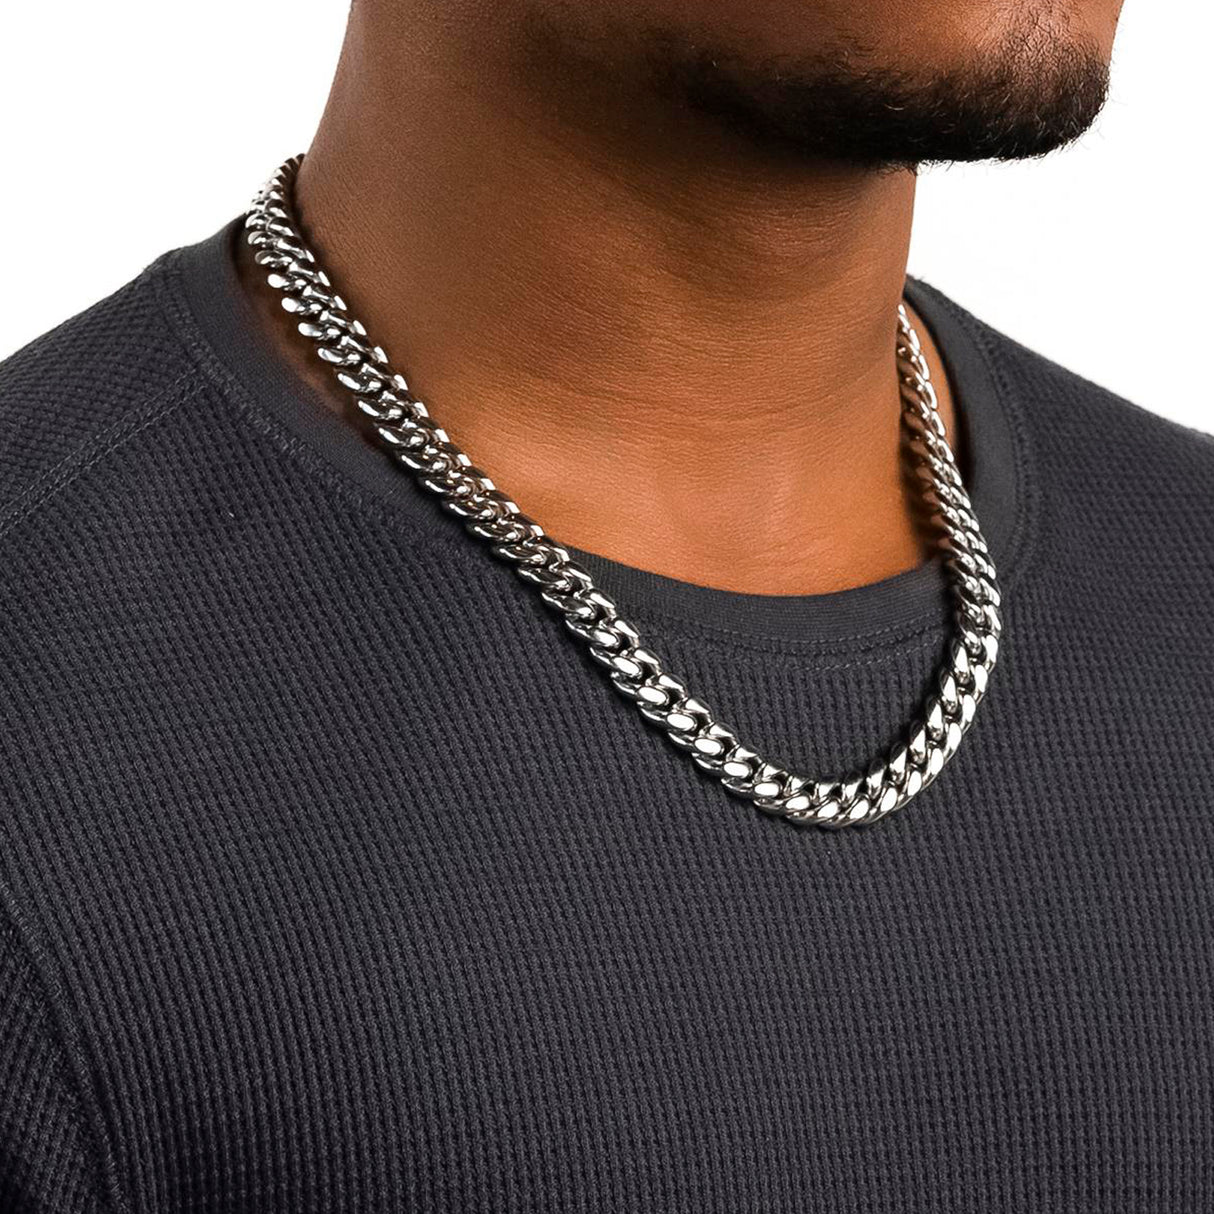 he-gold-gods-mens-jewelry-18k-white-gold-plated-miami-cuban-link-necklace-12mm-22inch